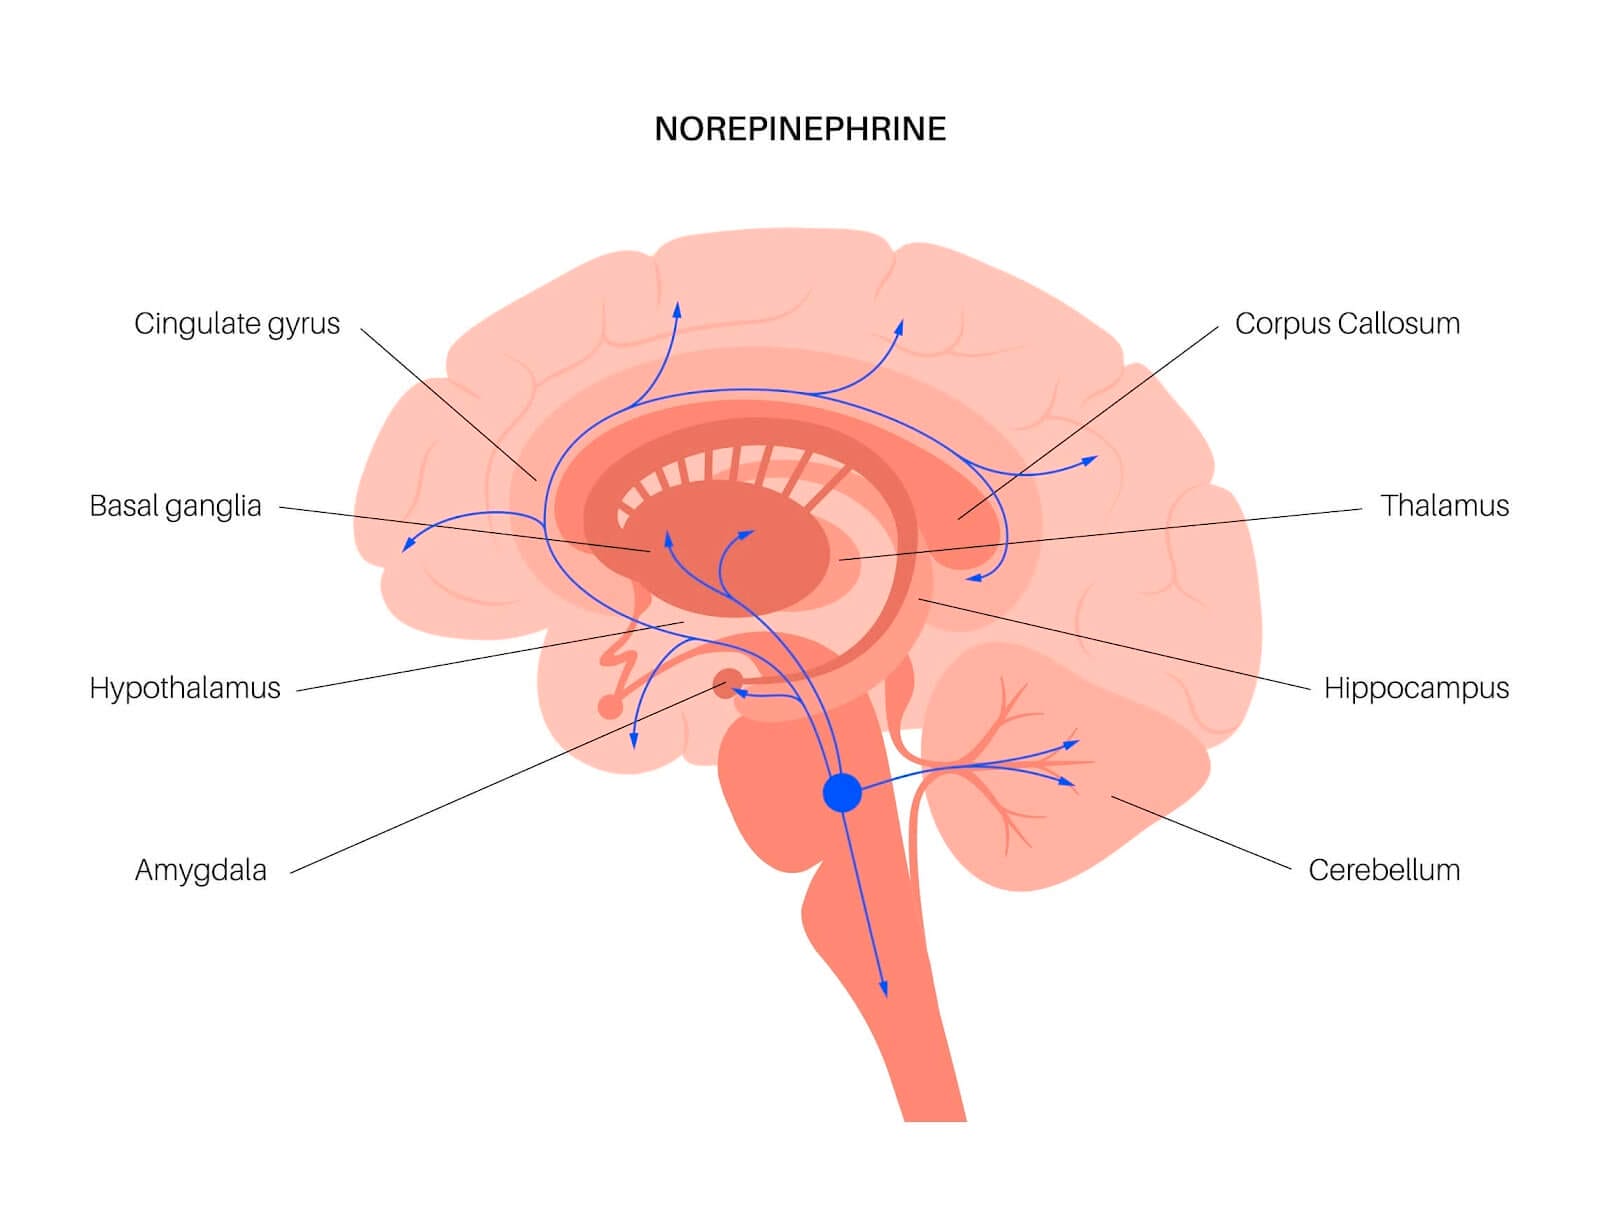 The norepinephrine pathway involves the conversion of the amino acid tyrosine to L-DOPA, which is then converted to dopamine and subsequently to norepinephrine, primarily in the locus coeruleus (marked by the blue dot) of the brain. It plays a crucial role in regulating alertness, attention, stress responses and energy levels.